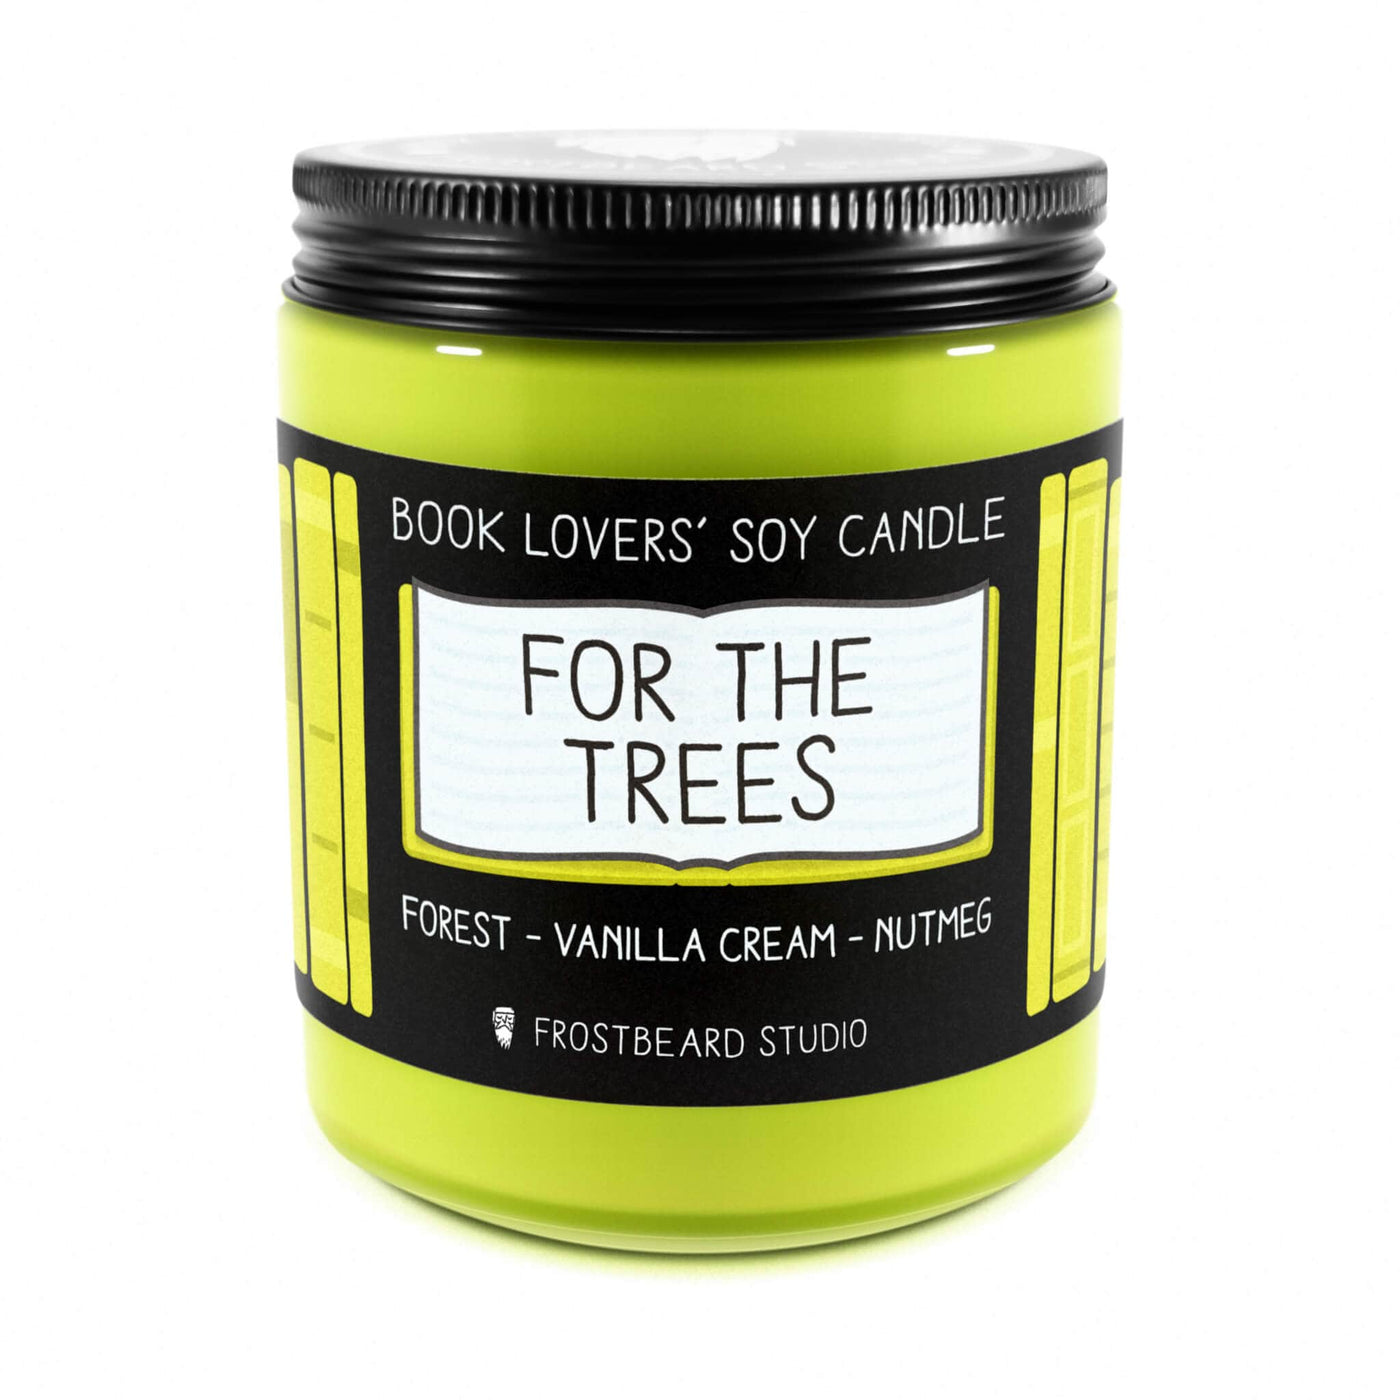 For the Trees  -  8 oz Jar  -  Book Lovers' Soy Candle  -  Frostbeard Studio